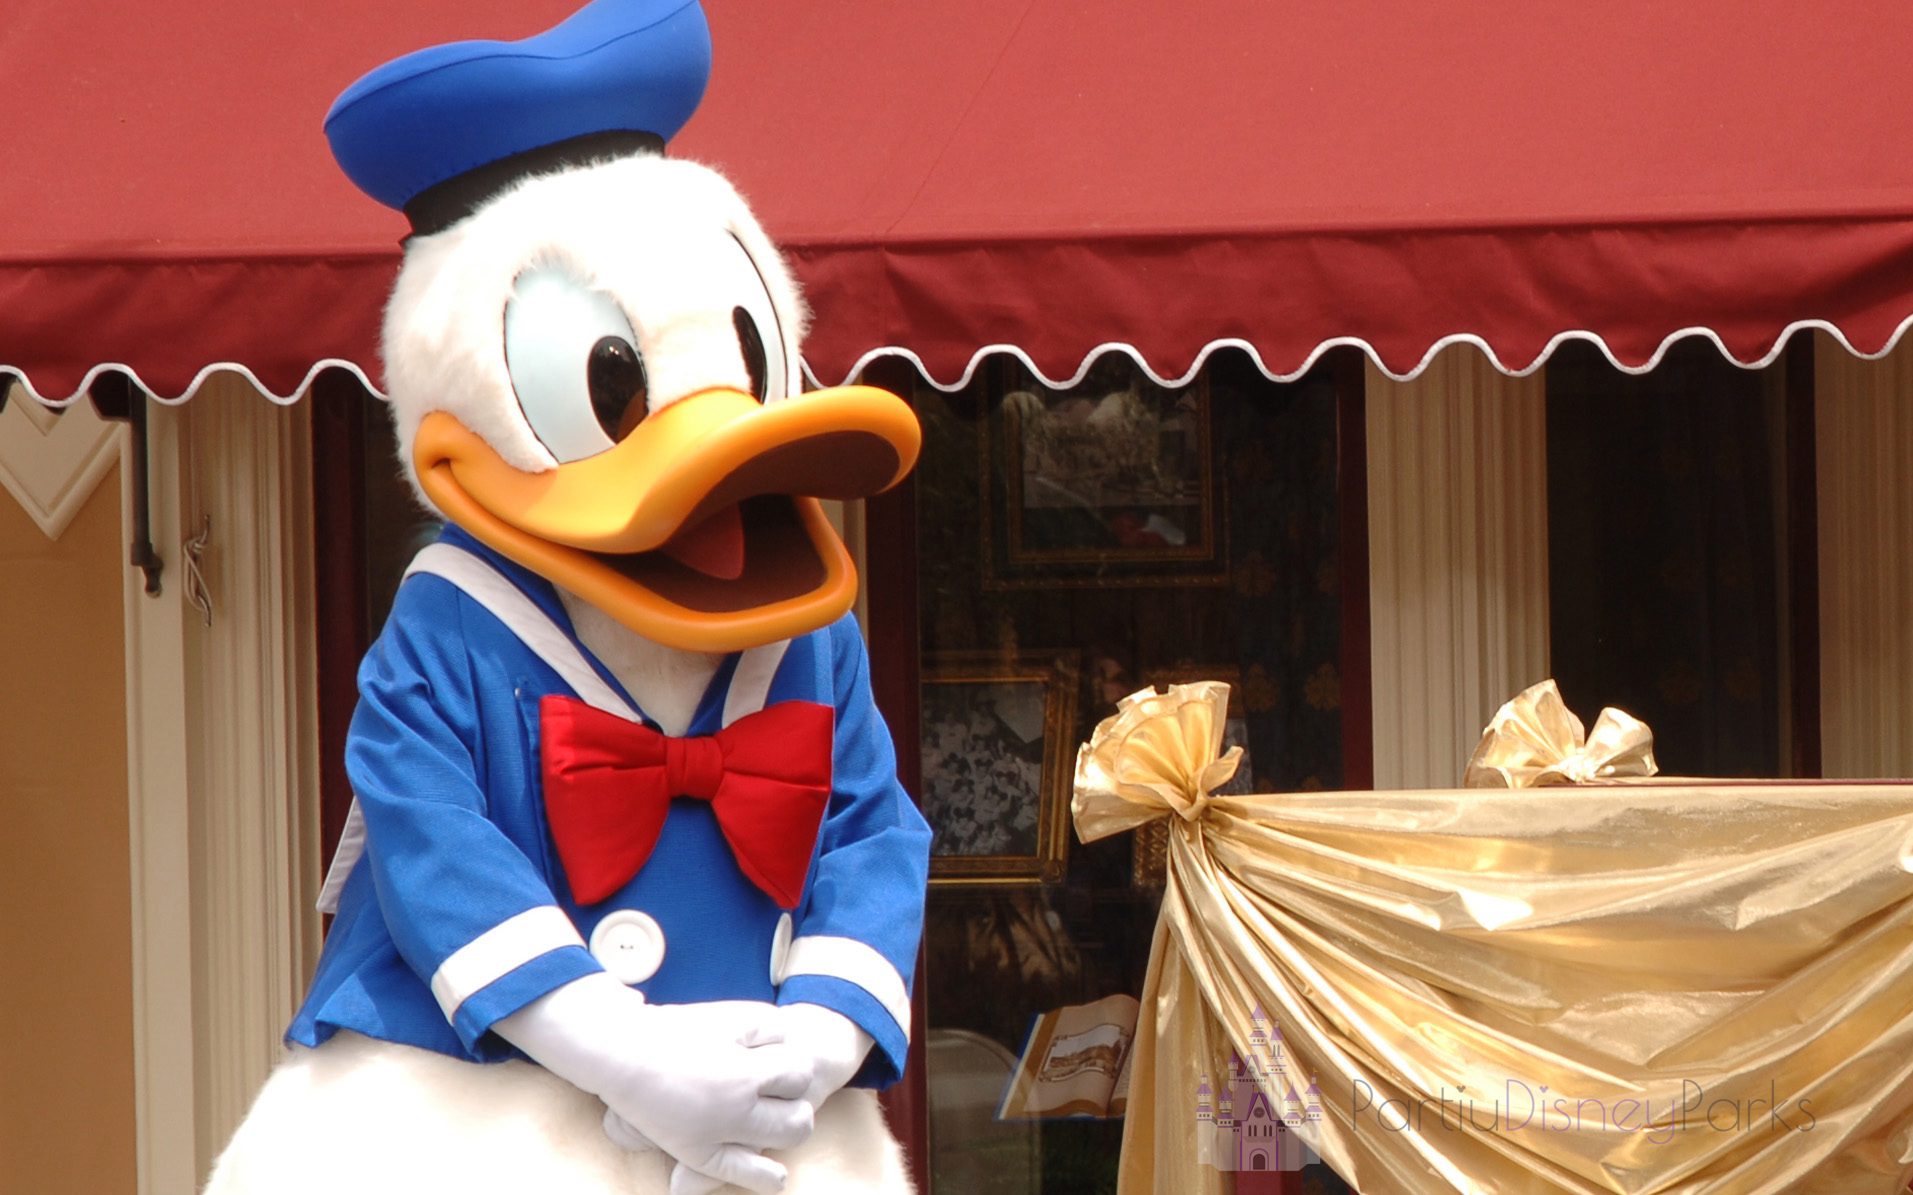 Our guide lists 8 ways on how to find Donald Duck at Disney